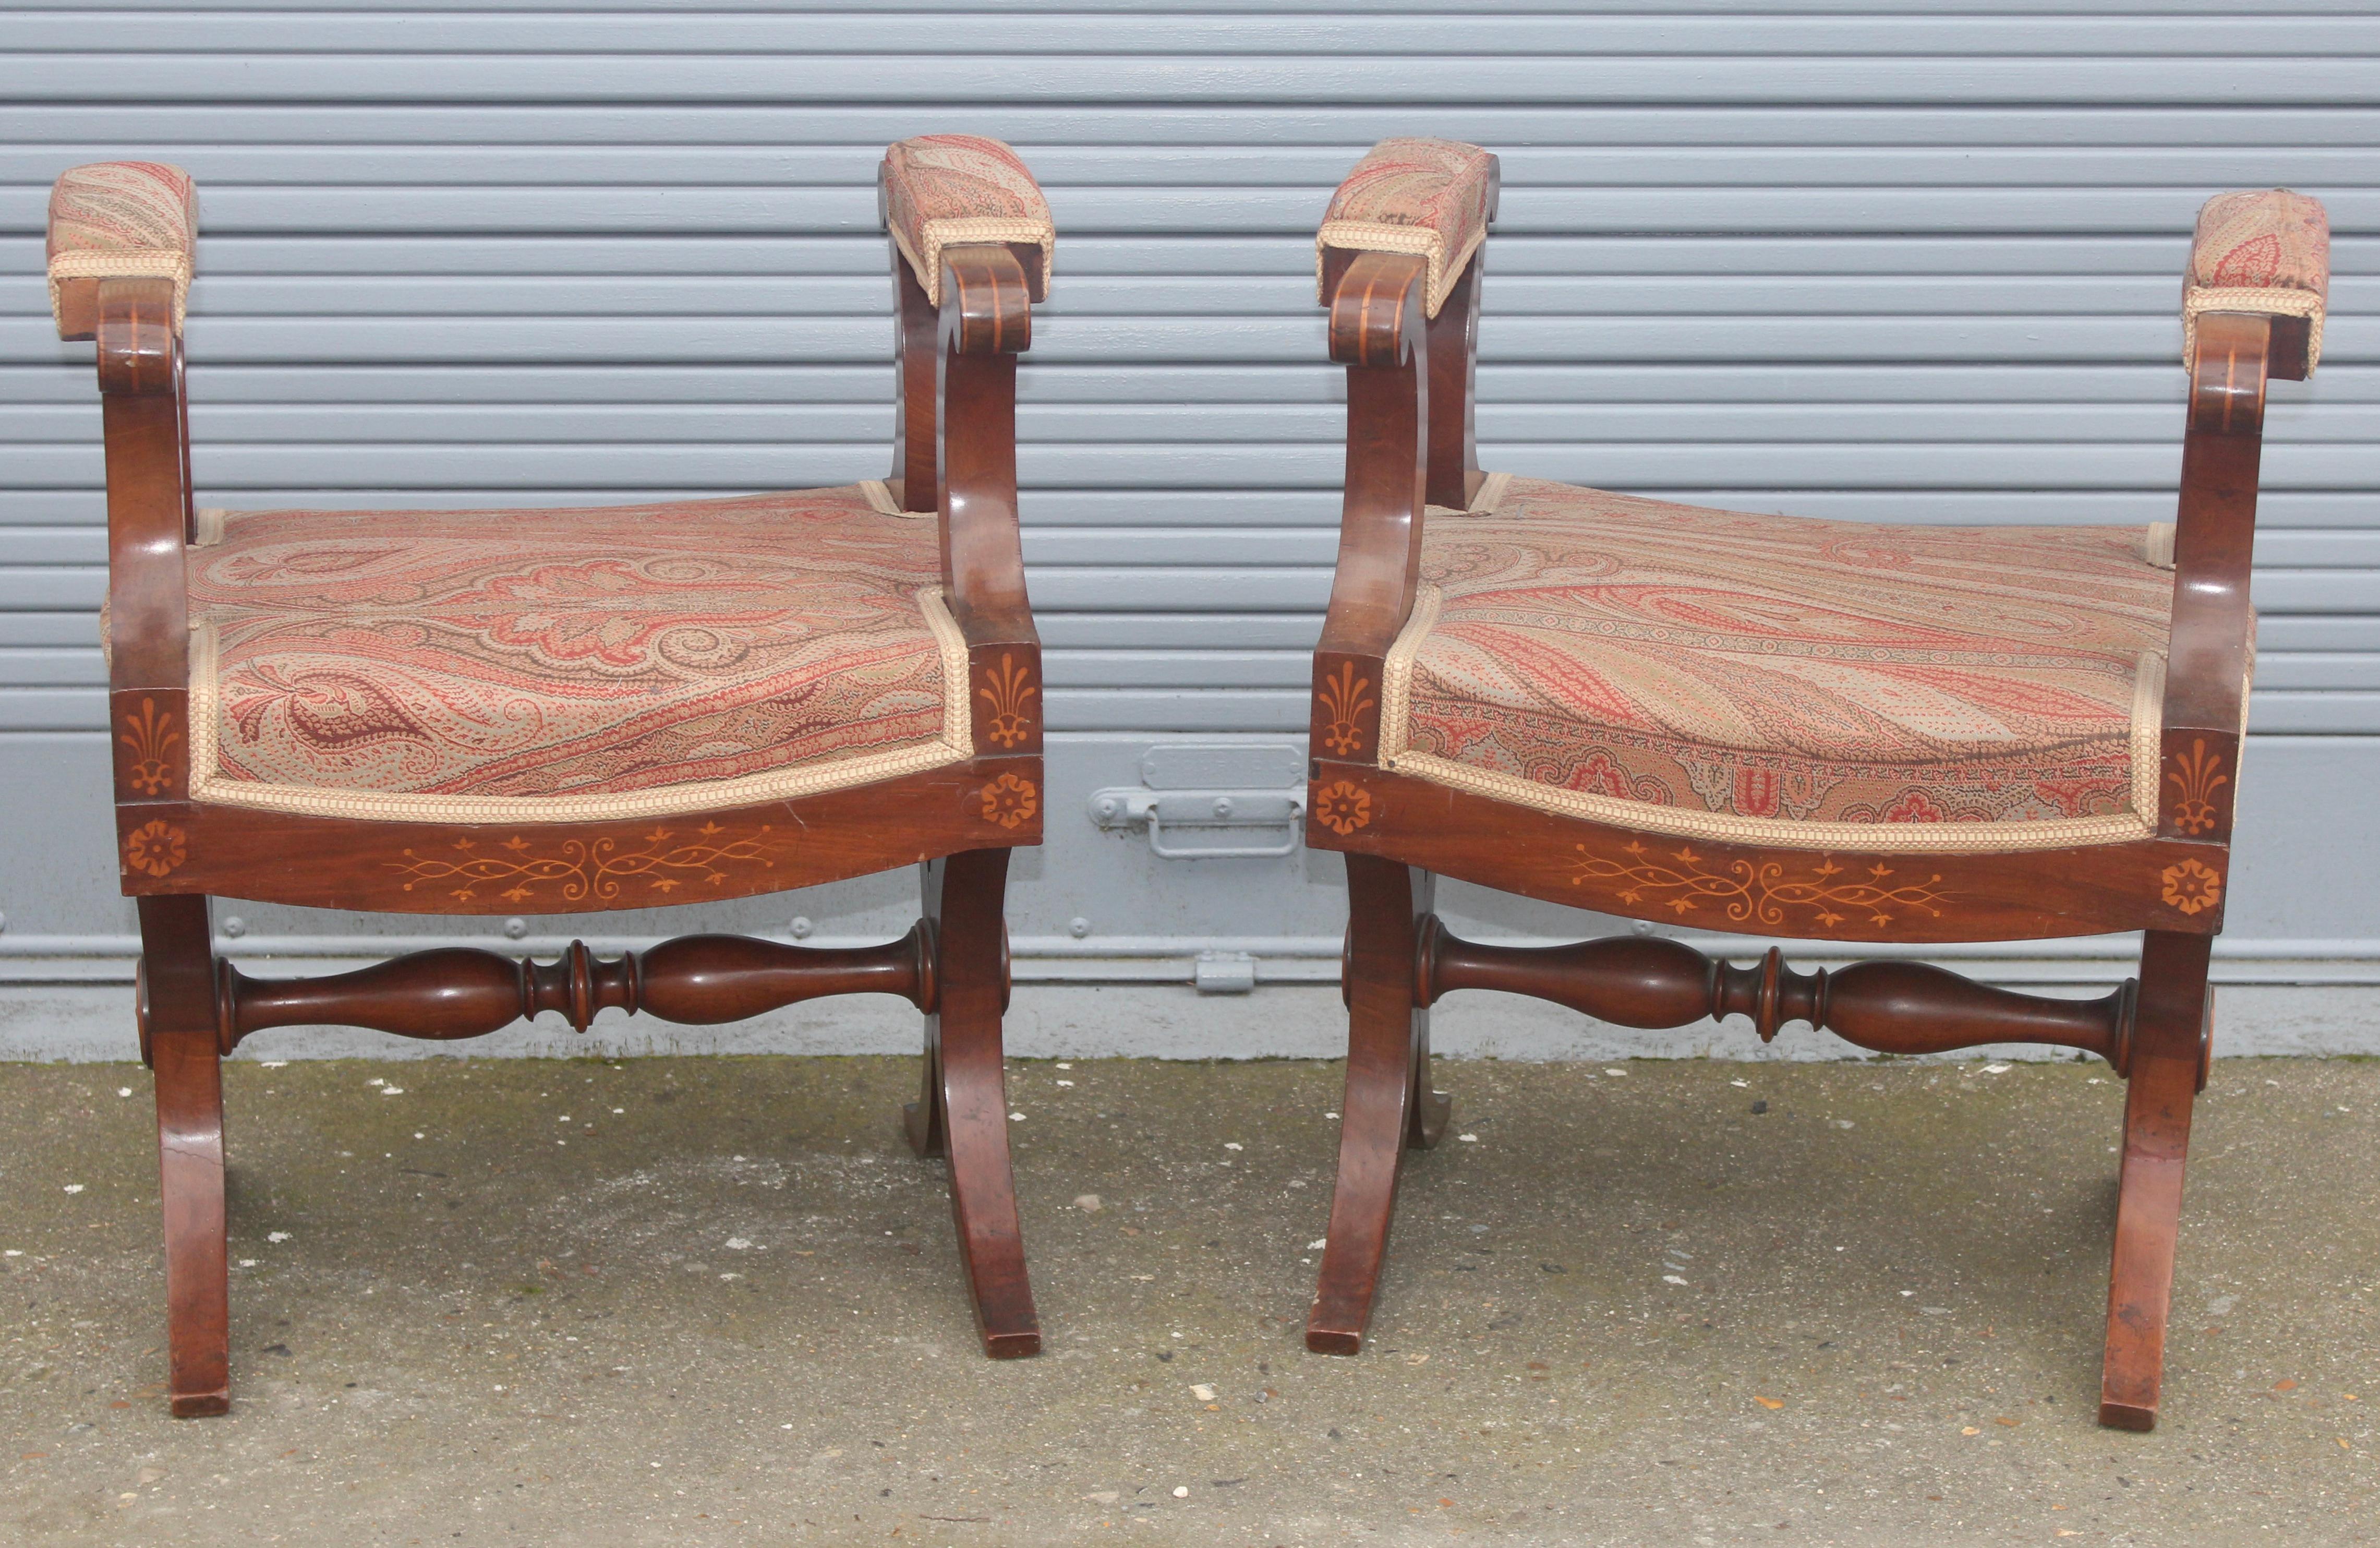 Pair of French 19th century Charles X stools with arms
Mahogany and fruitwood inlaid with neoclassical foliate scrolls, rosaces and palmettes
with upholstered arms and seat,
circa 1825.
  